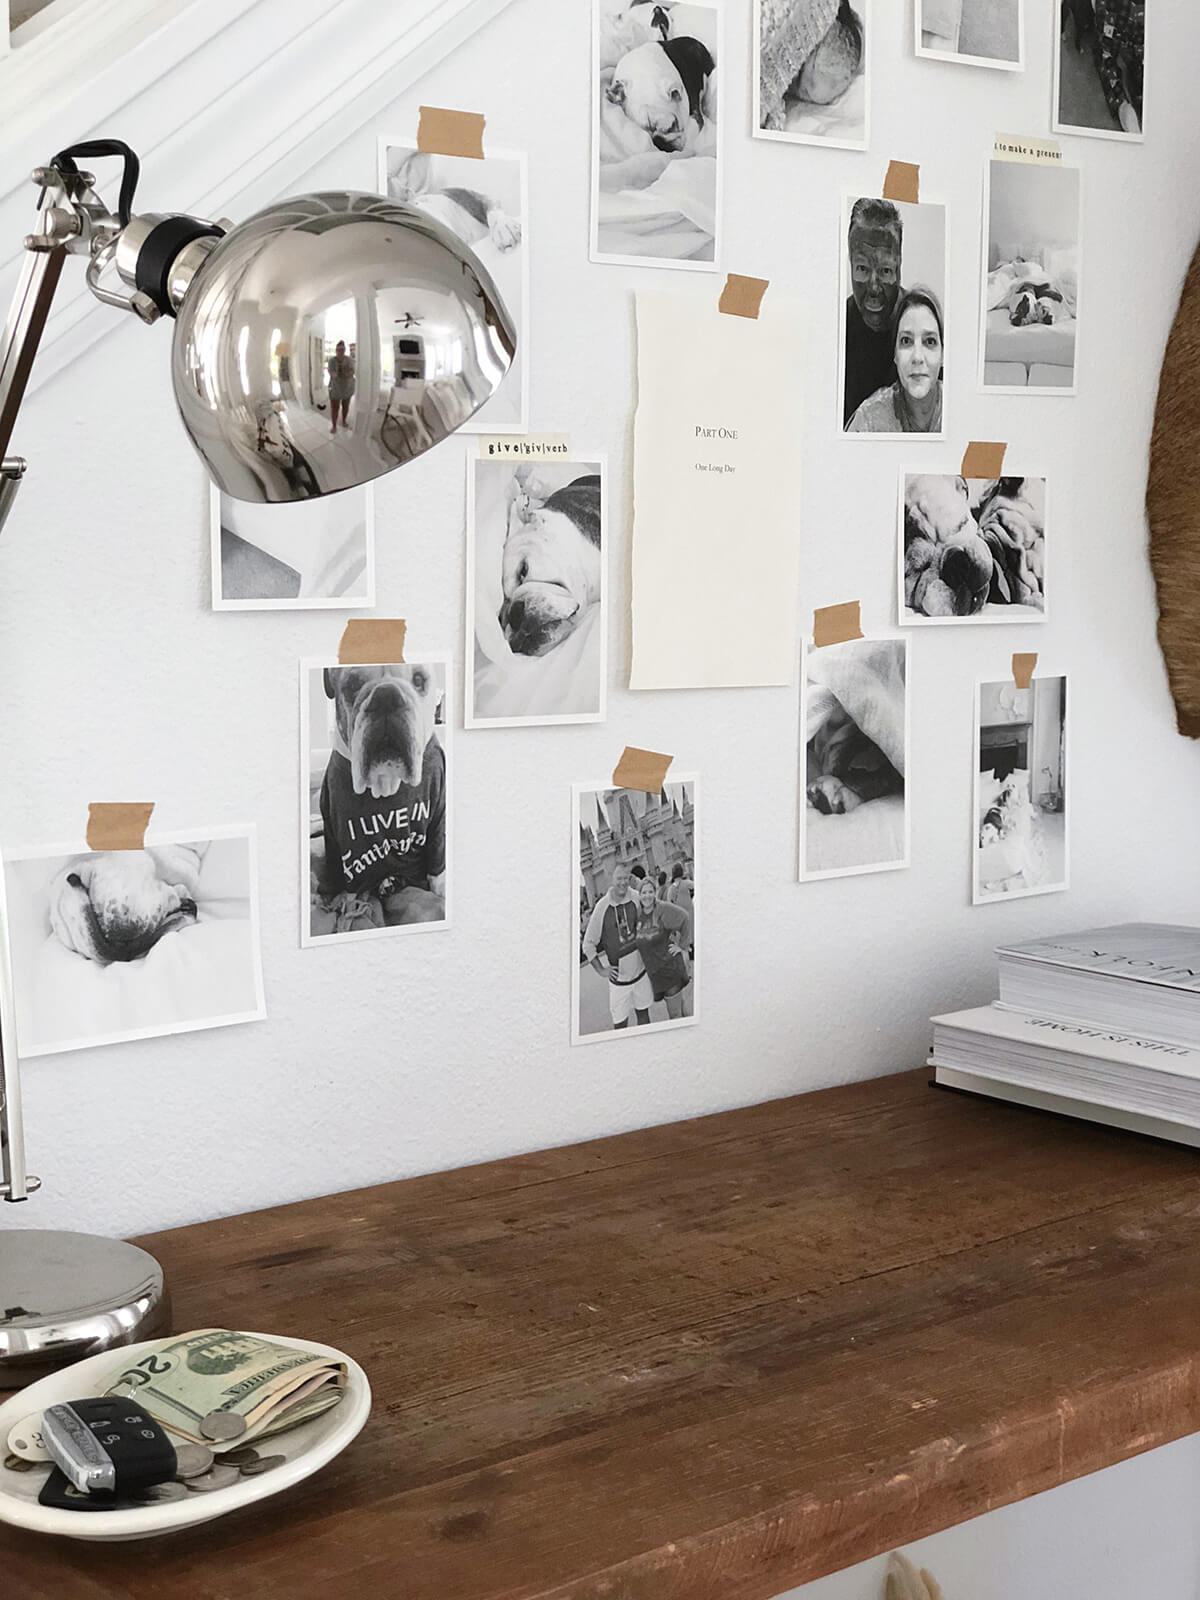 15 Creative Photo Display Ideas That Don T Need Frames,Tile On All Bathroom Walls